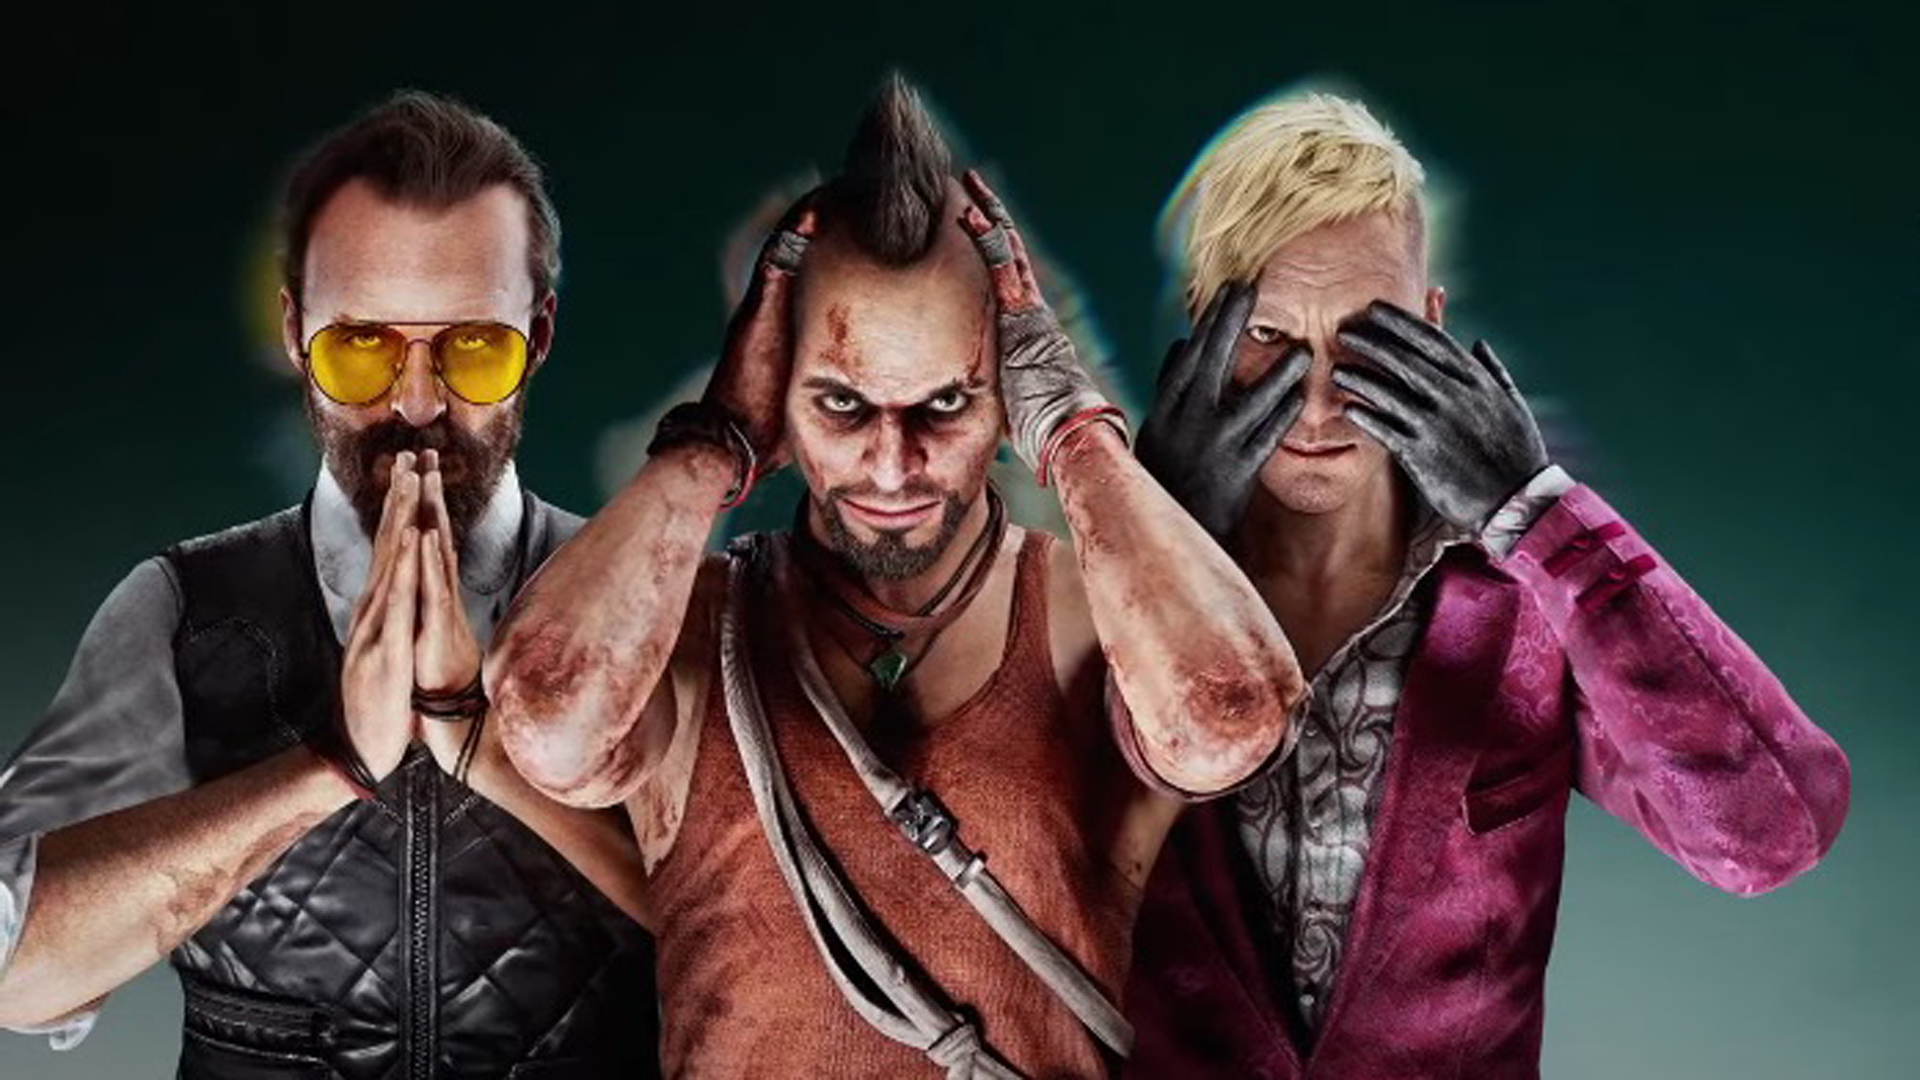 Far Cry 6 DLC release date – Become the Villain DLC, Special Operations,  and more